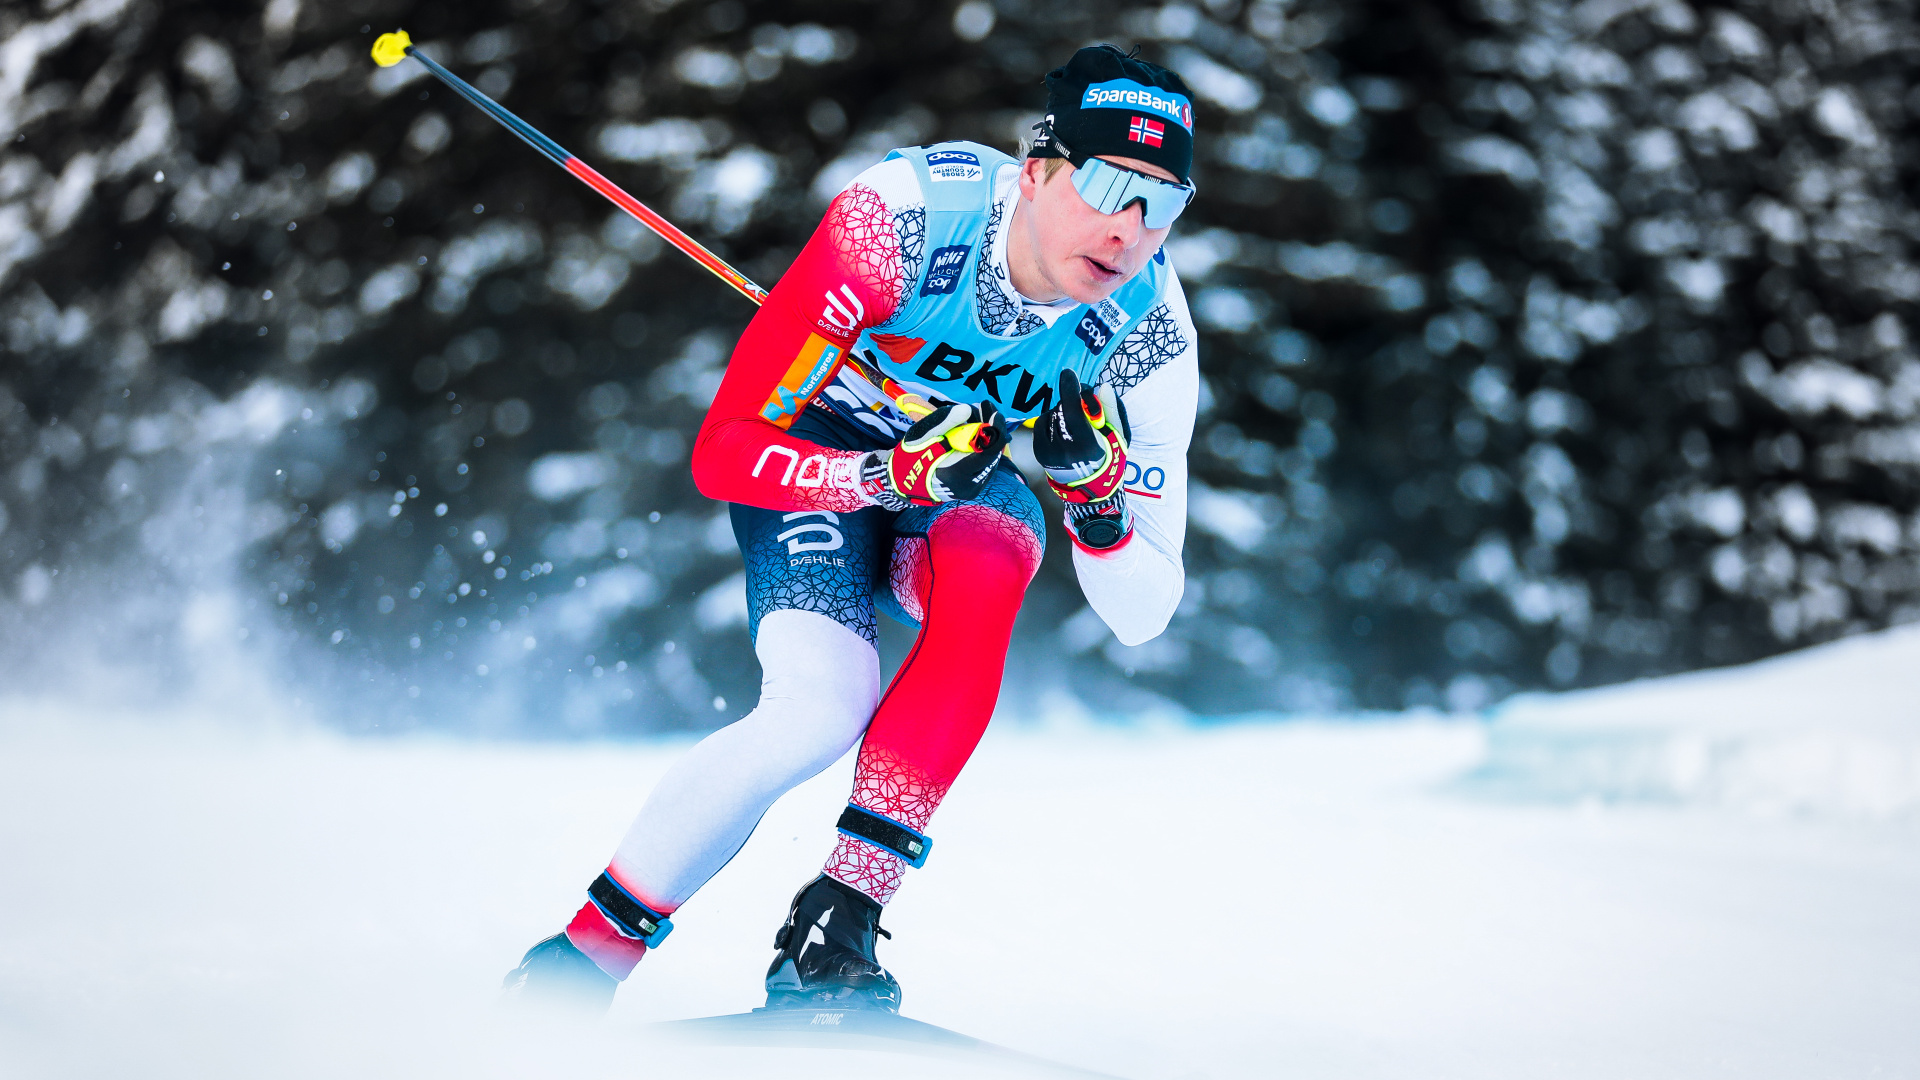 Simen Hegstad Kruger, Skiing ace tests positive, COVID trouble for Norway, 1920x1080 Full HD Desktop